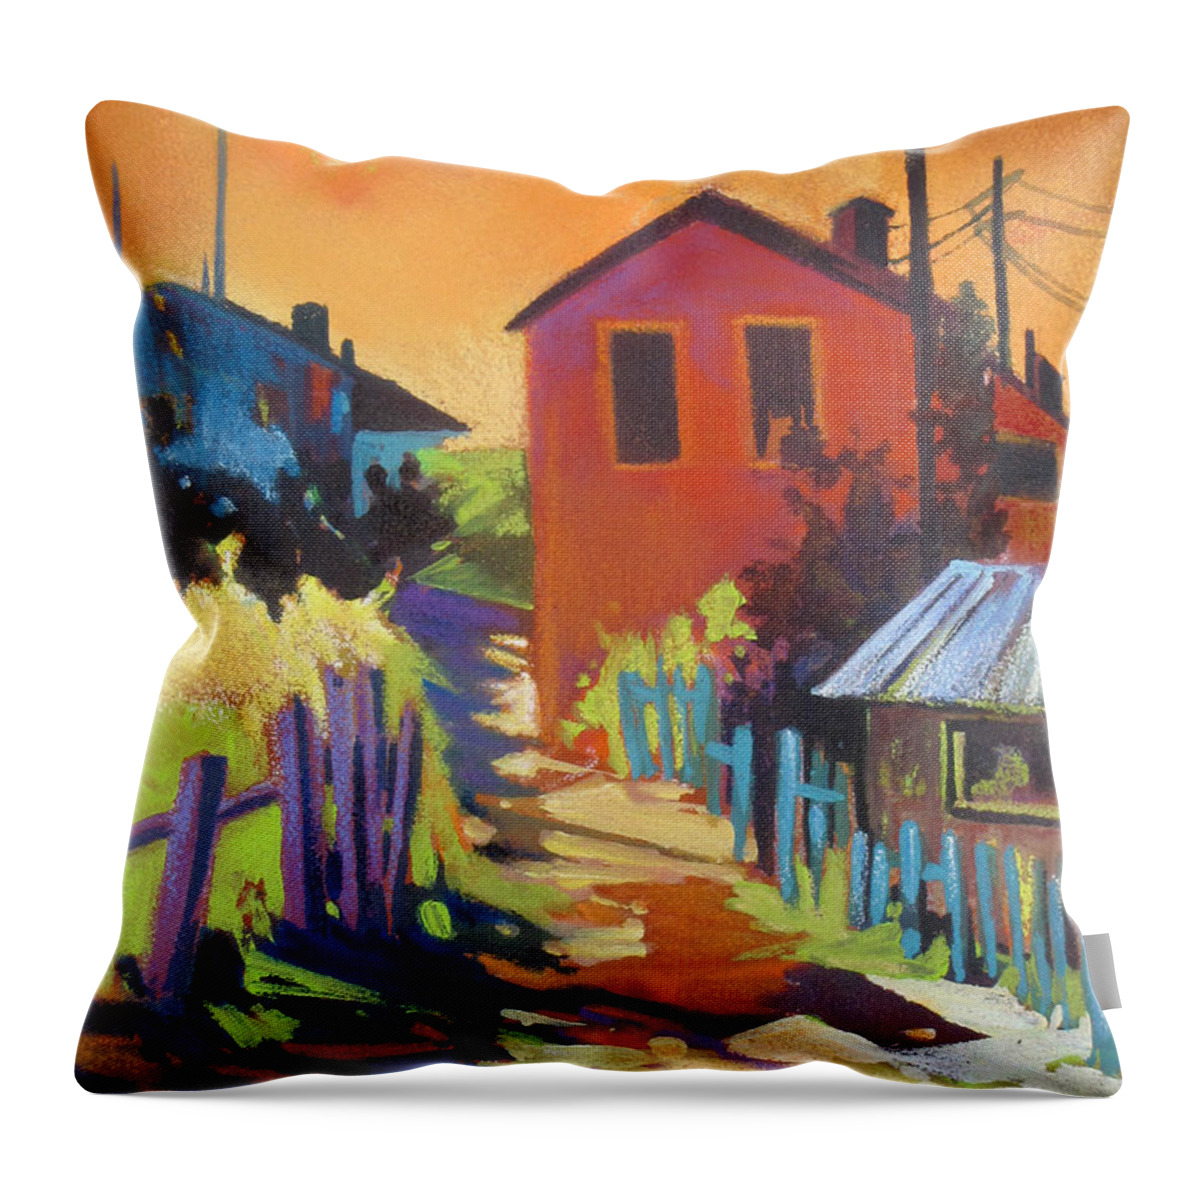 Abstract Throw Pillow featuring the painting Heat Of The Day by Rae Andrews